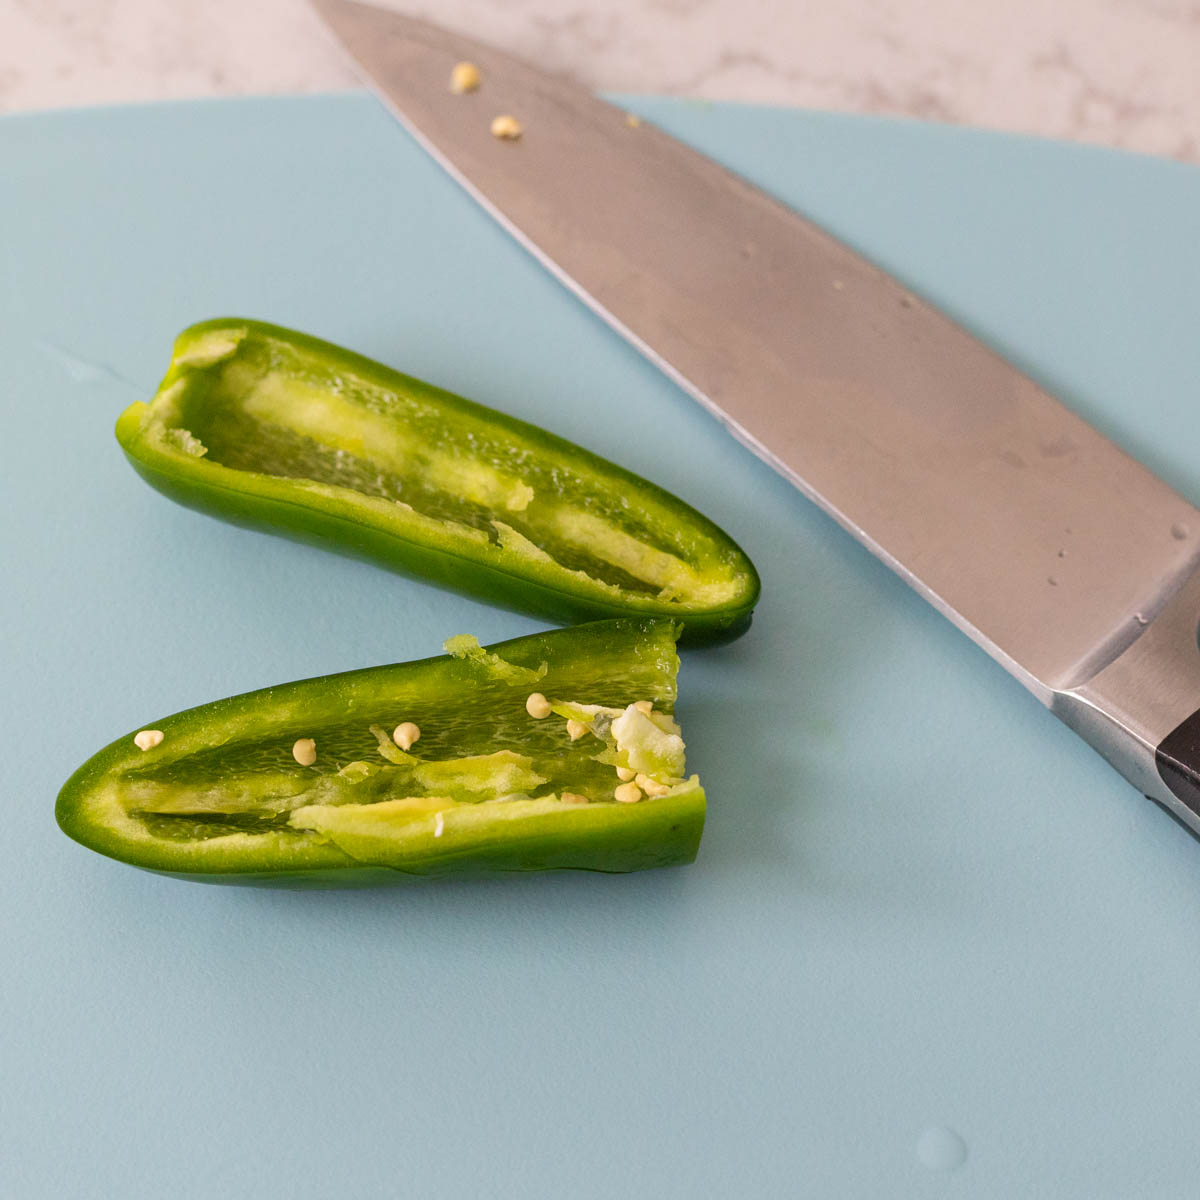 the Jalapeño has been sliced in half on a cutting board.